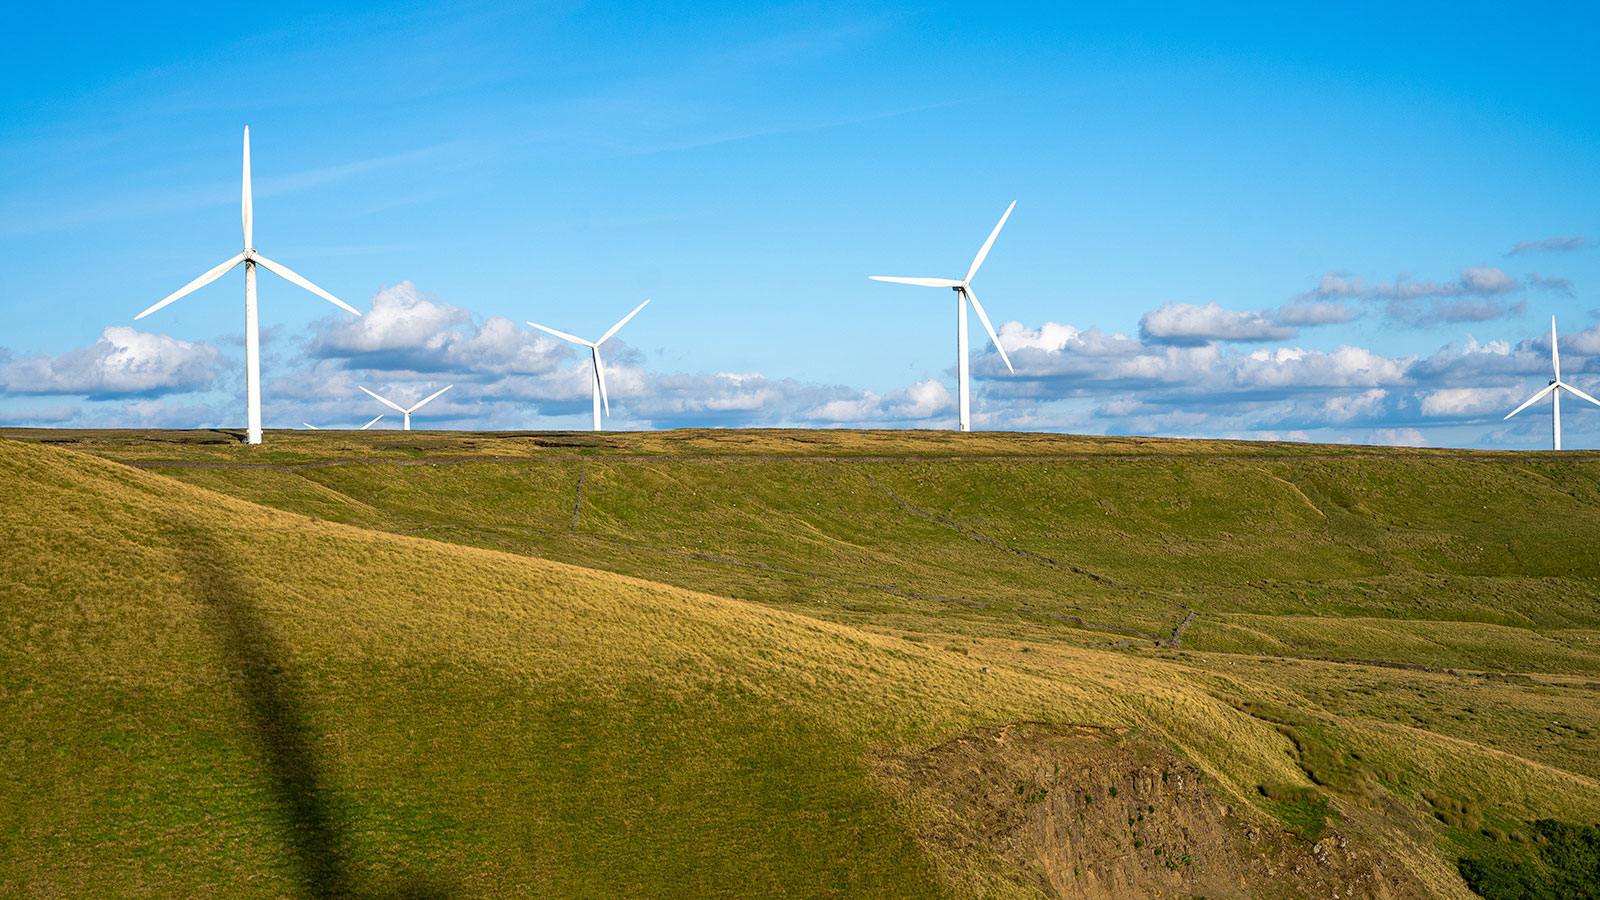 UK could potentially produce 225,000 GWh of electricity from onshore solar and wind